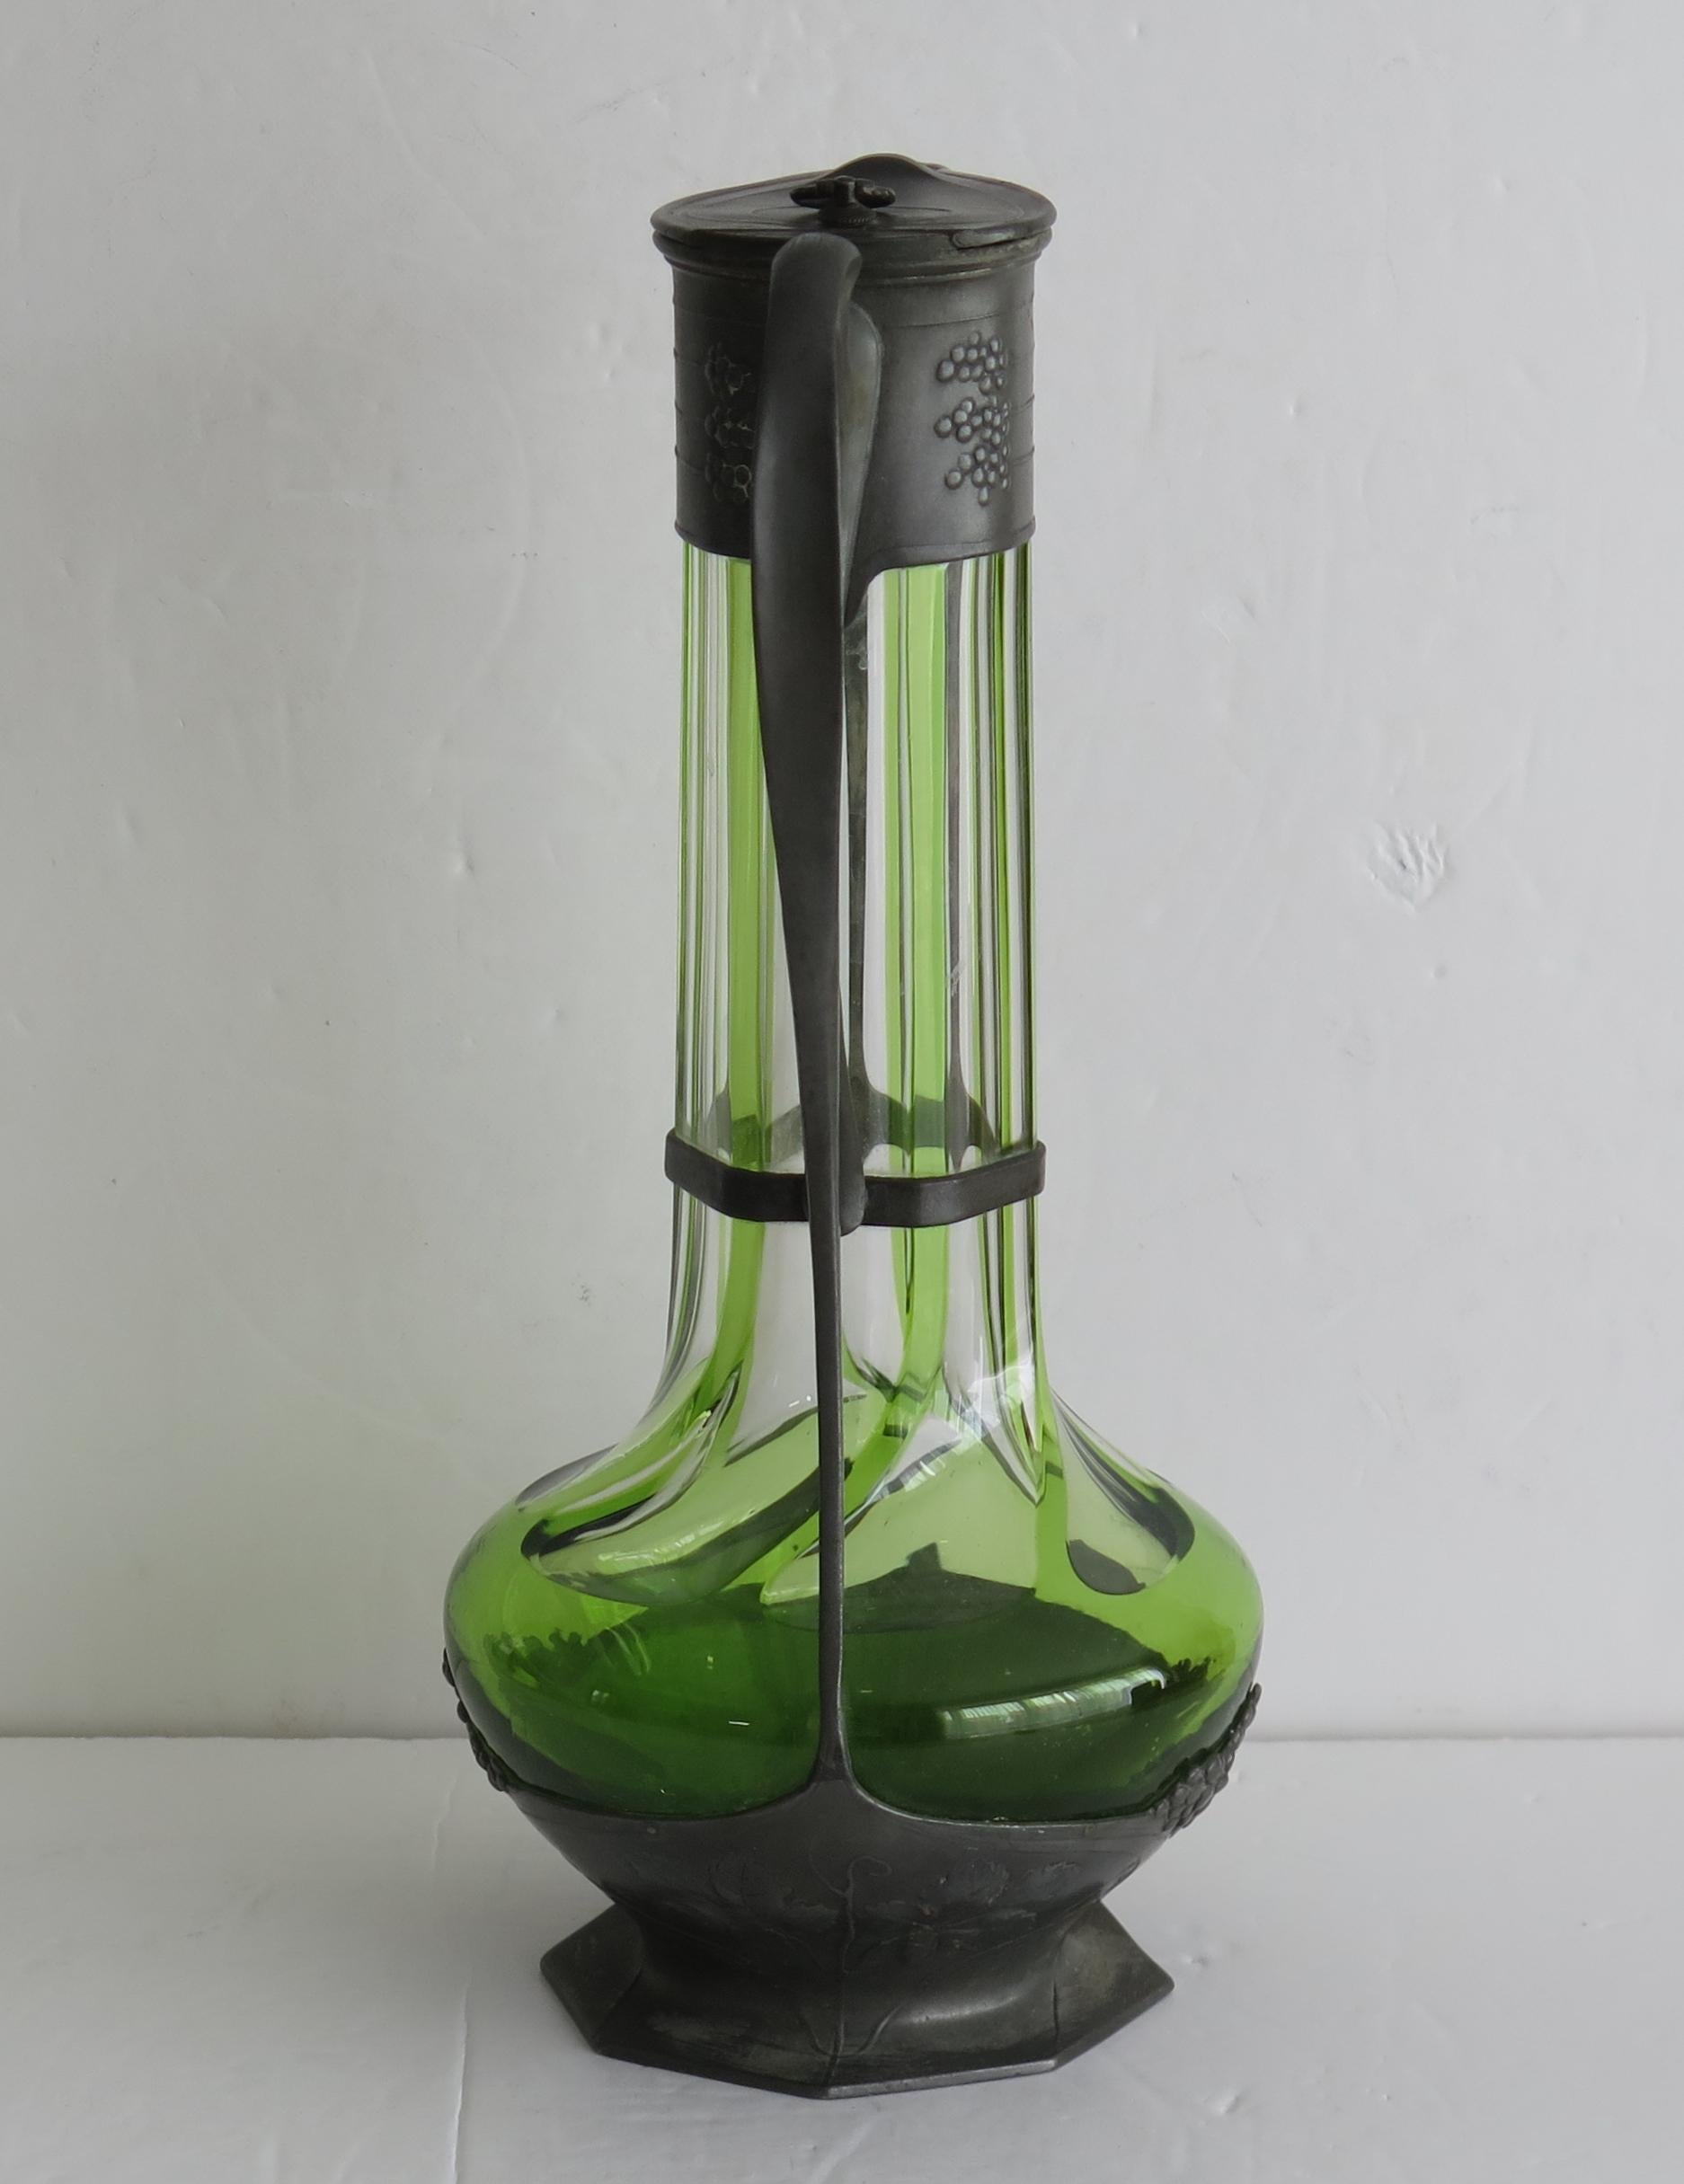 This is a good vertically ribbed green and clear glass bottle, encased in a pewter sleeve, all in the Art Nouveau style of the day , made by Orivit, Germany, Circa 1900.

The pewter design and decoration epitomises the 